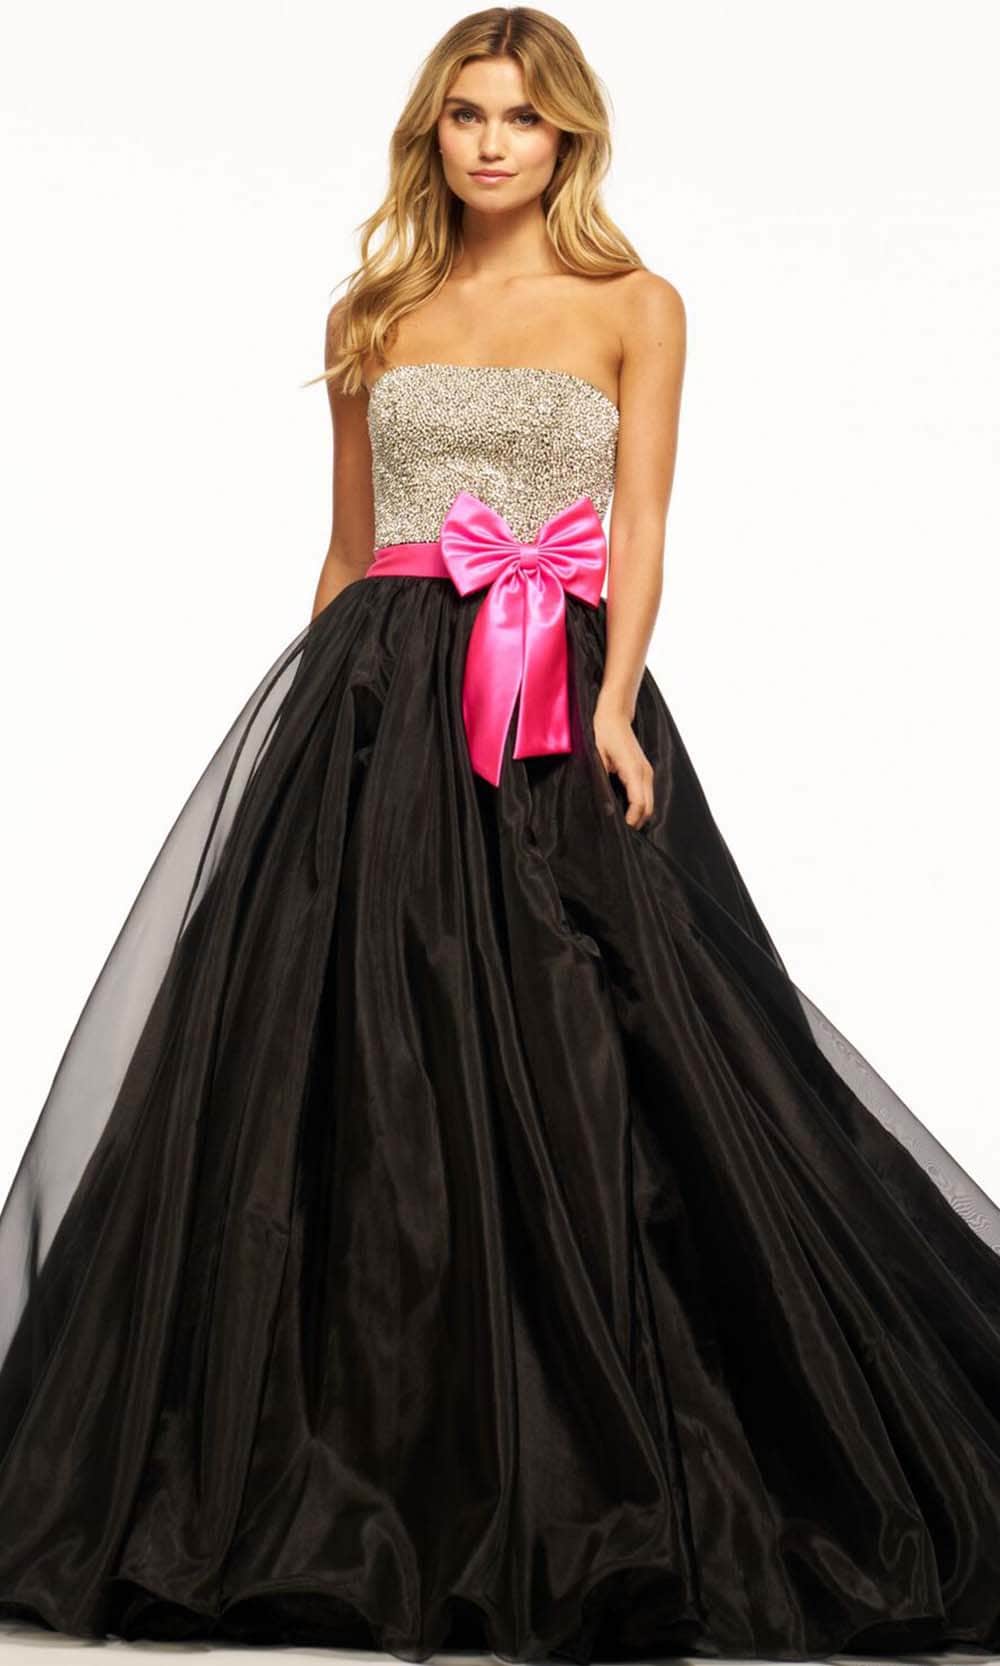 Image of Sherri Hill 55956 - Strapless Bow Accent Ballgown